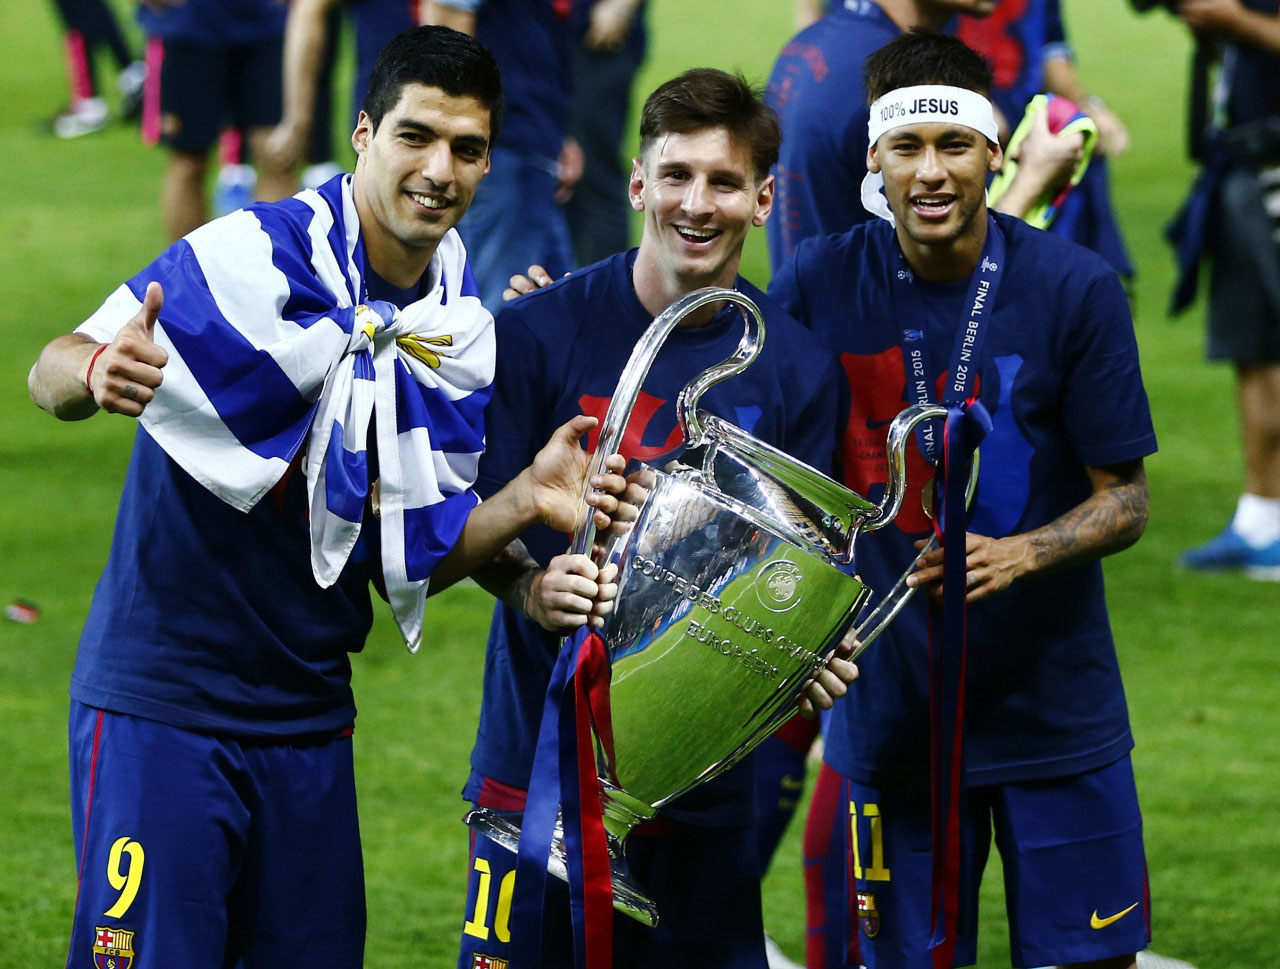 Suarez, Messi and Neymar holding the UEFA Champions League trophy in 2015